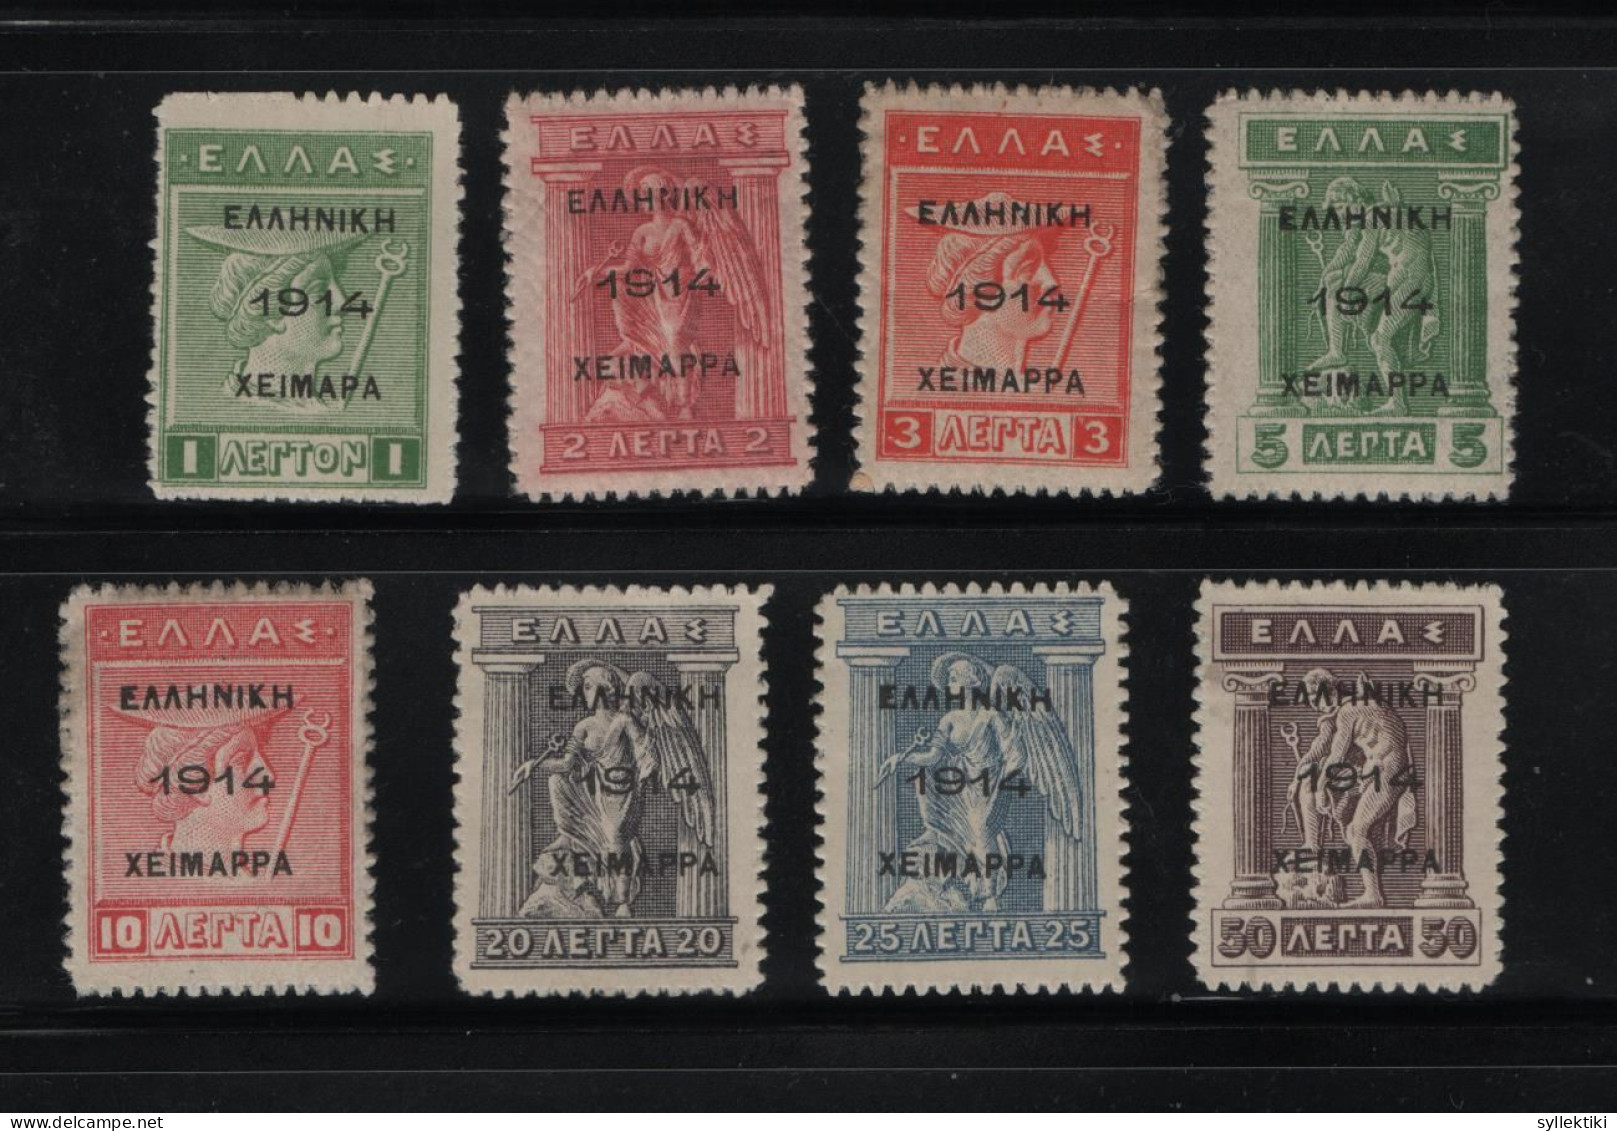 GREECE EPIRUS 1914 CHIMARRA ISSUE COMPLETE SET MH STAMPS    HELLAS No 68 - 75 AND VALUE EURO 1300.00 - Epirus & Albania